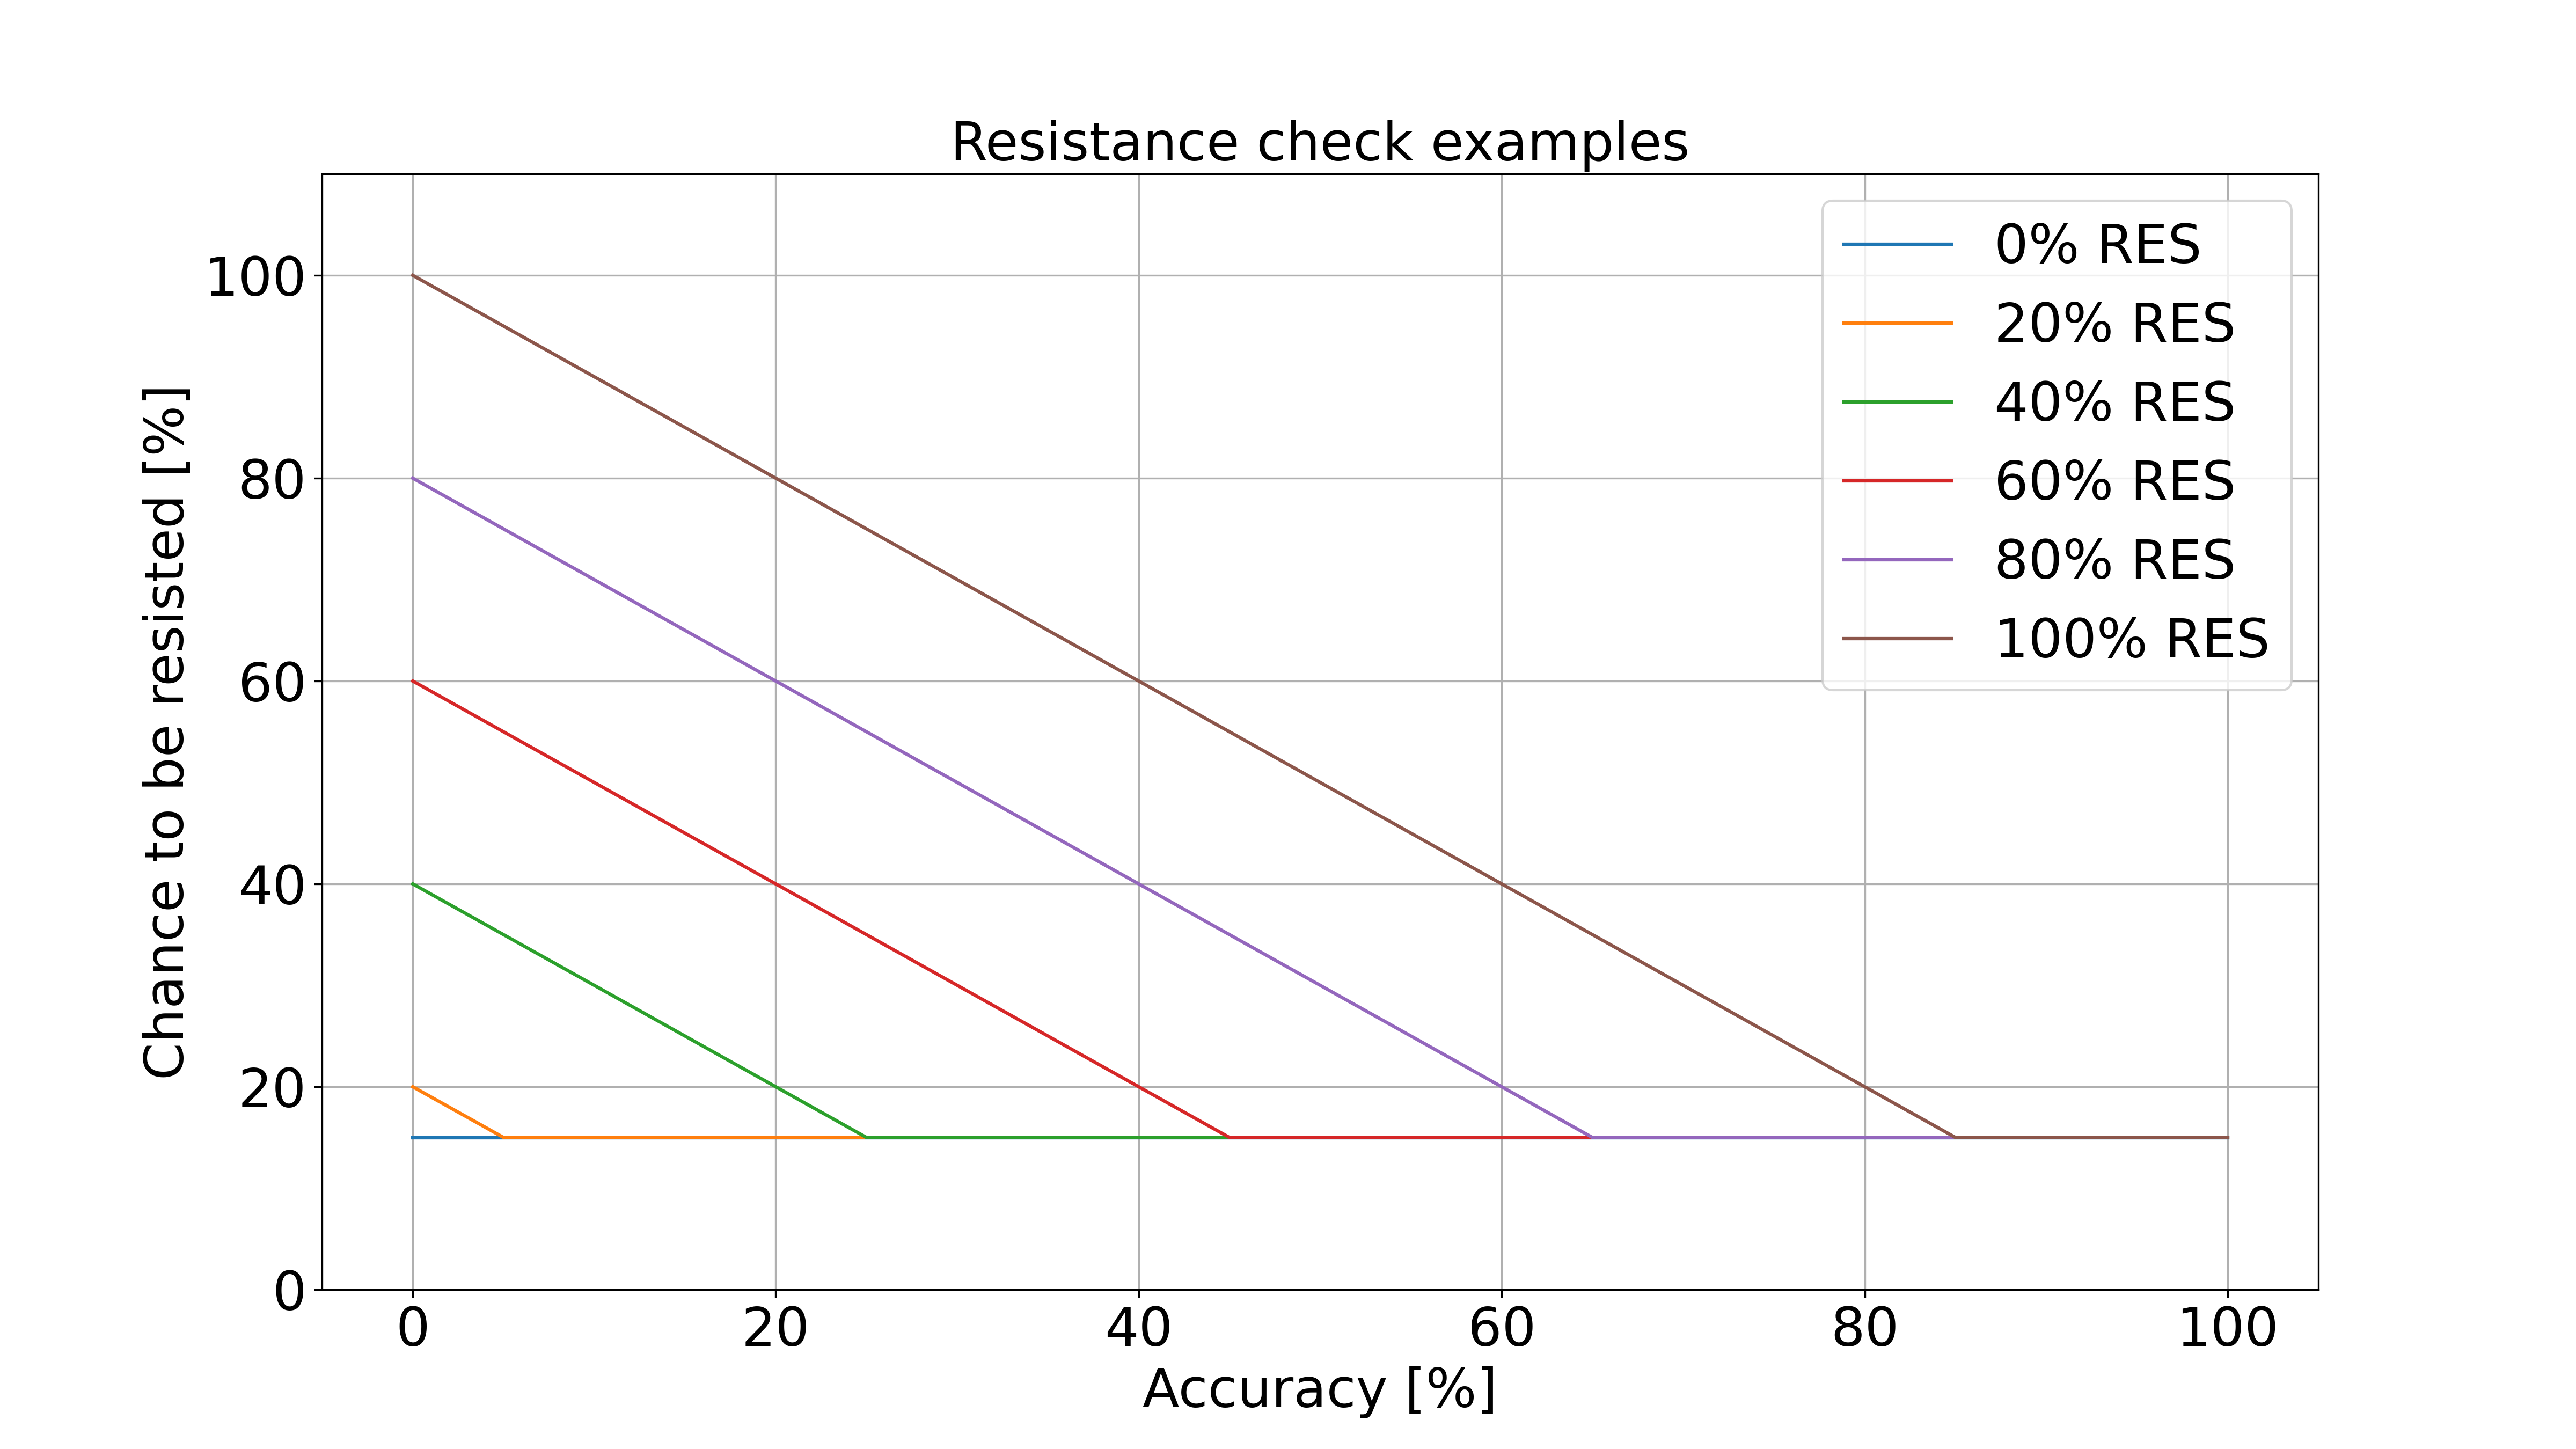 Accuracy and Resistance sample values